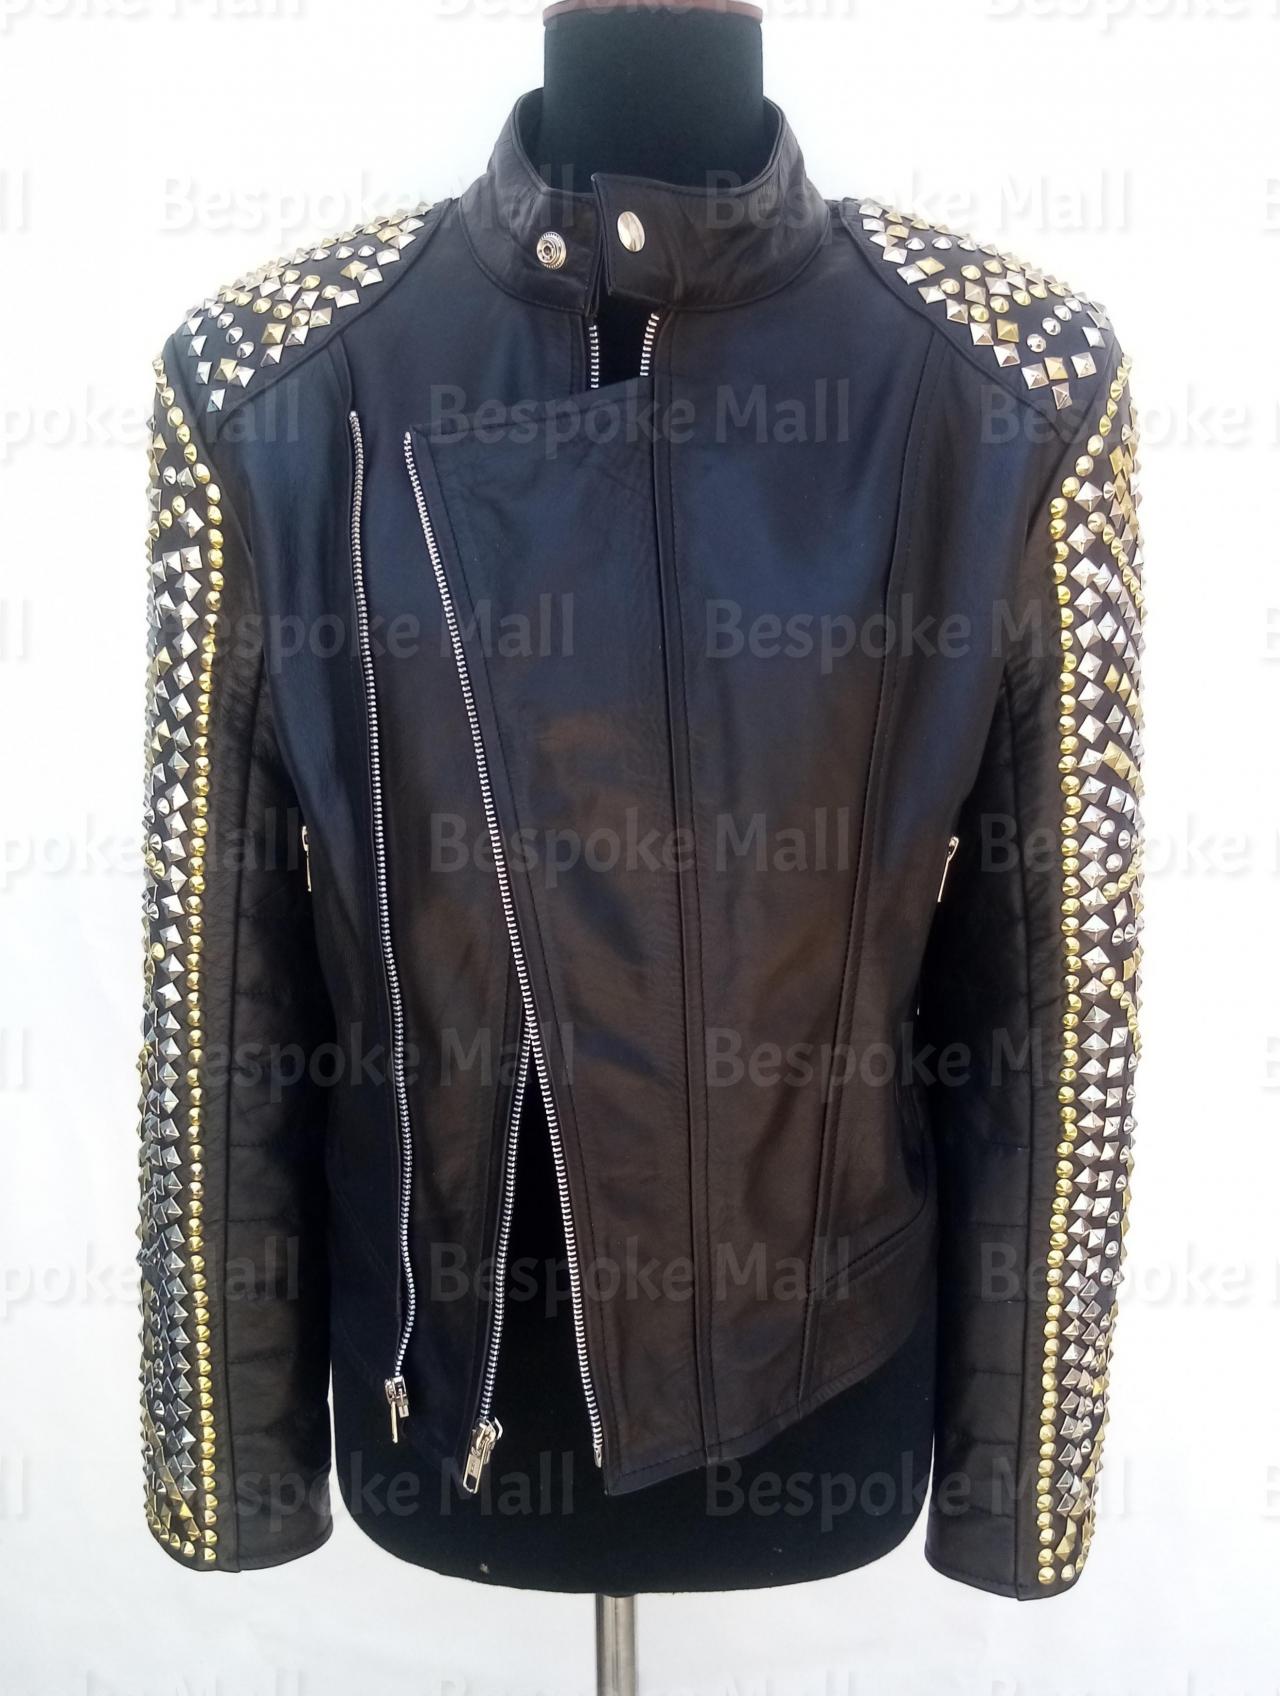 Handmade Women Black Multicolored Golden Silver Studded Unique Style Biker On Sleeves Tab Caller Cowhide Leather Jacket-61